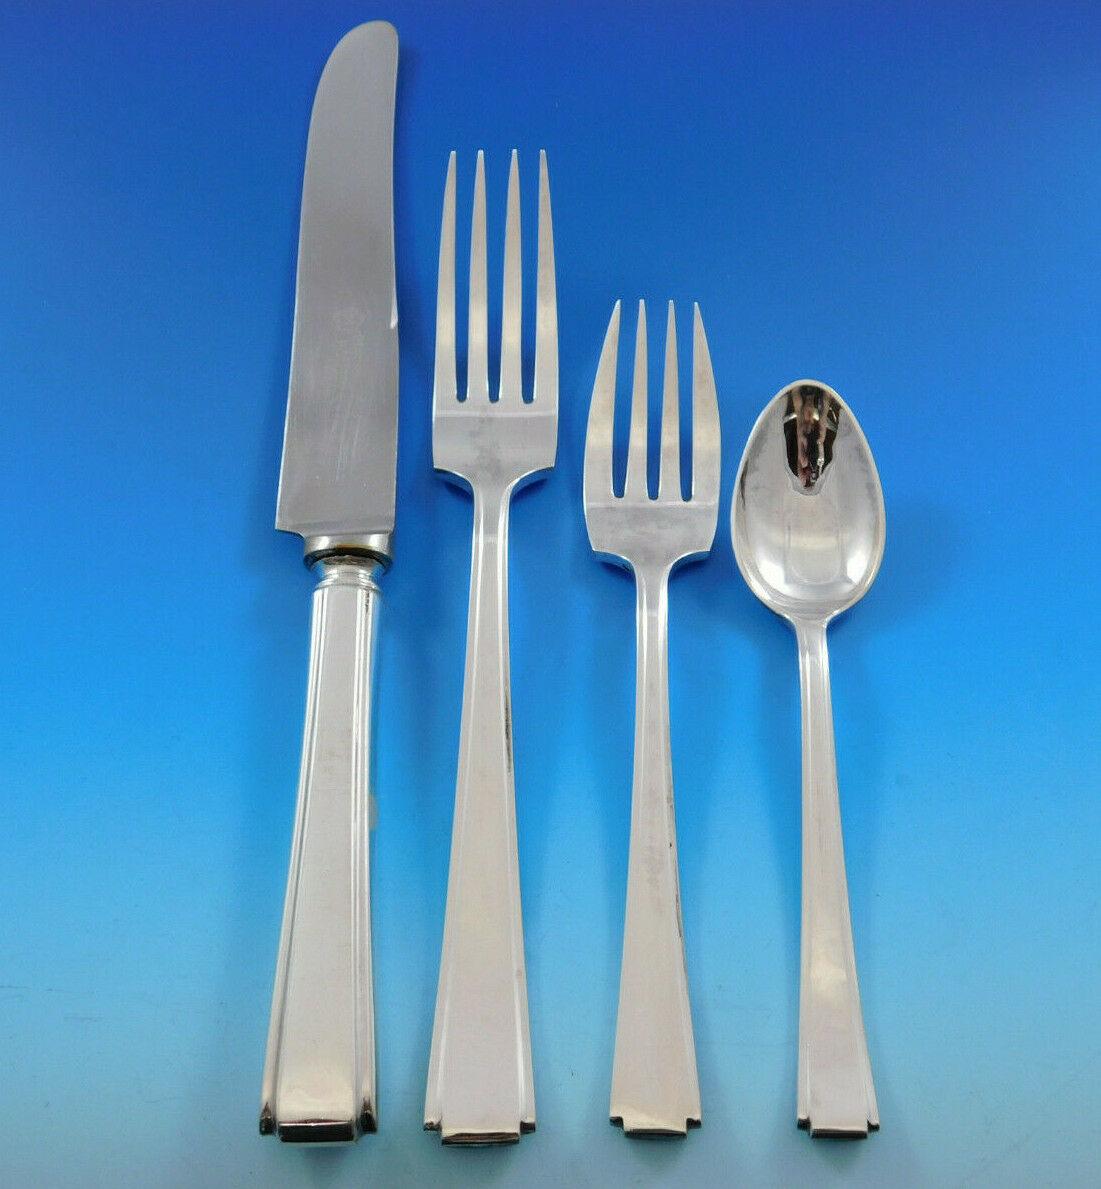 This large 118 piece Japanese silver by Hosoya Modernism style silver flatware set (reminiscent of Modern Classic by Lunt) has a higher silver content than standard American sterling flatware, 925/1000. This set is 950/1000 silver and has great